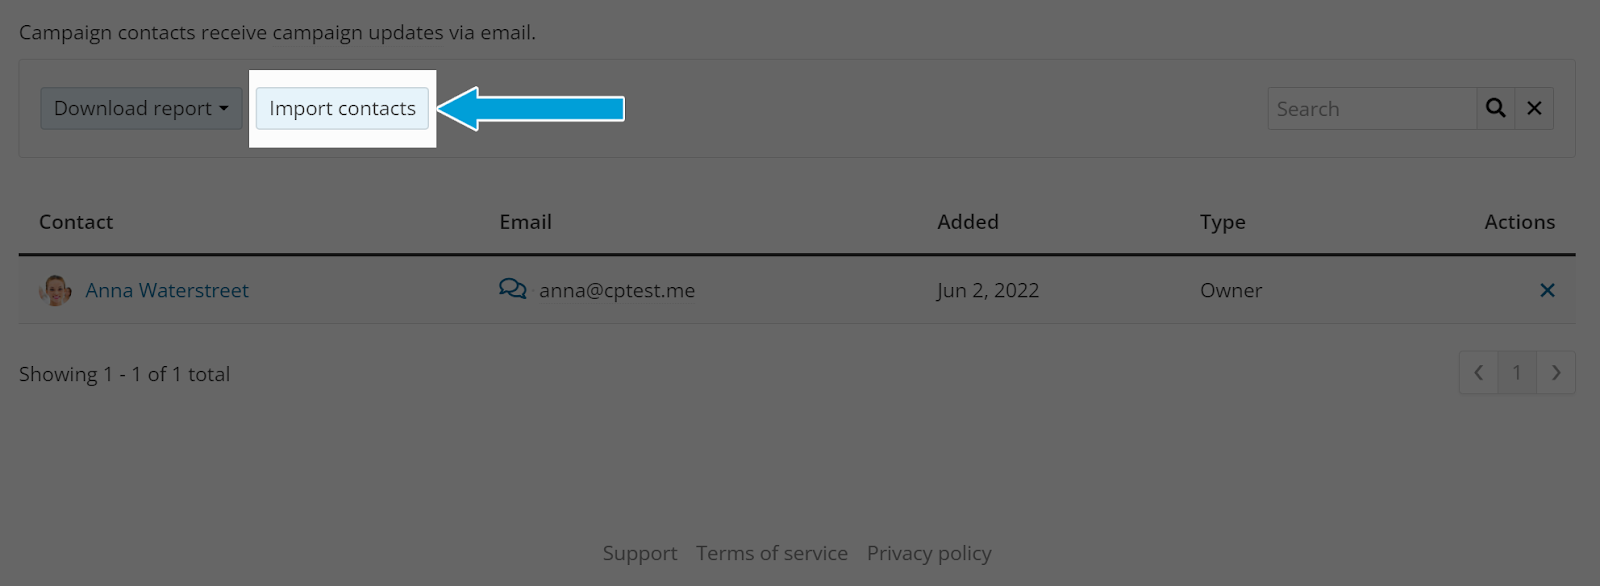 Screenshot of Contacts menu. Under 'Campaign contacts receive campaign updates via email', there are two buttons: Download report, Import contacts. Import contacts is highlighted